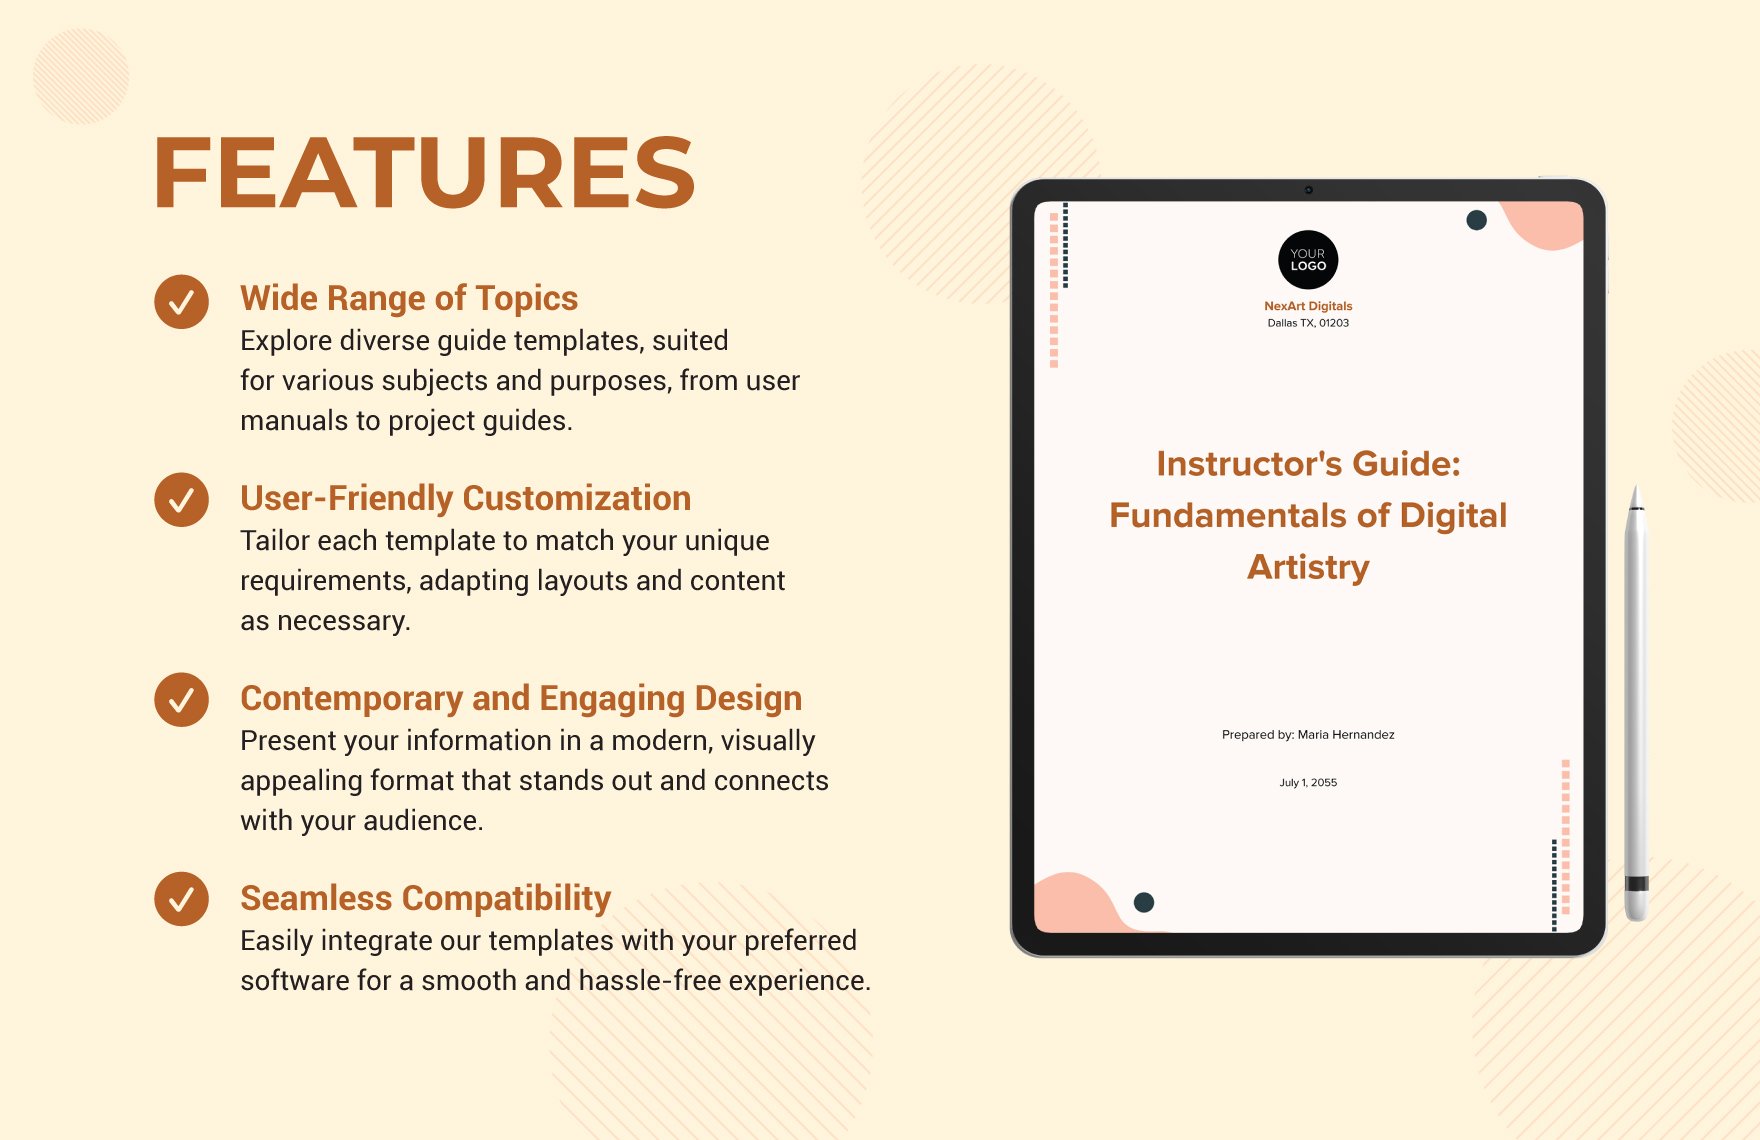 Instructor Guide Template